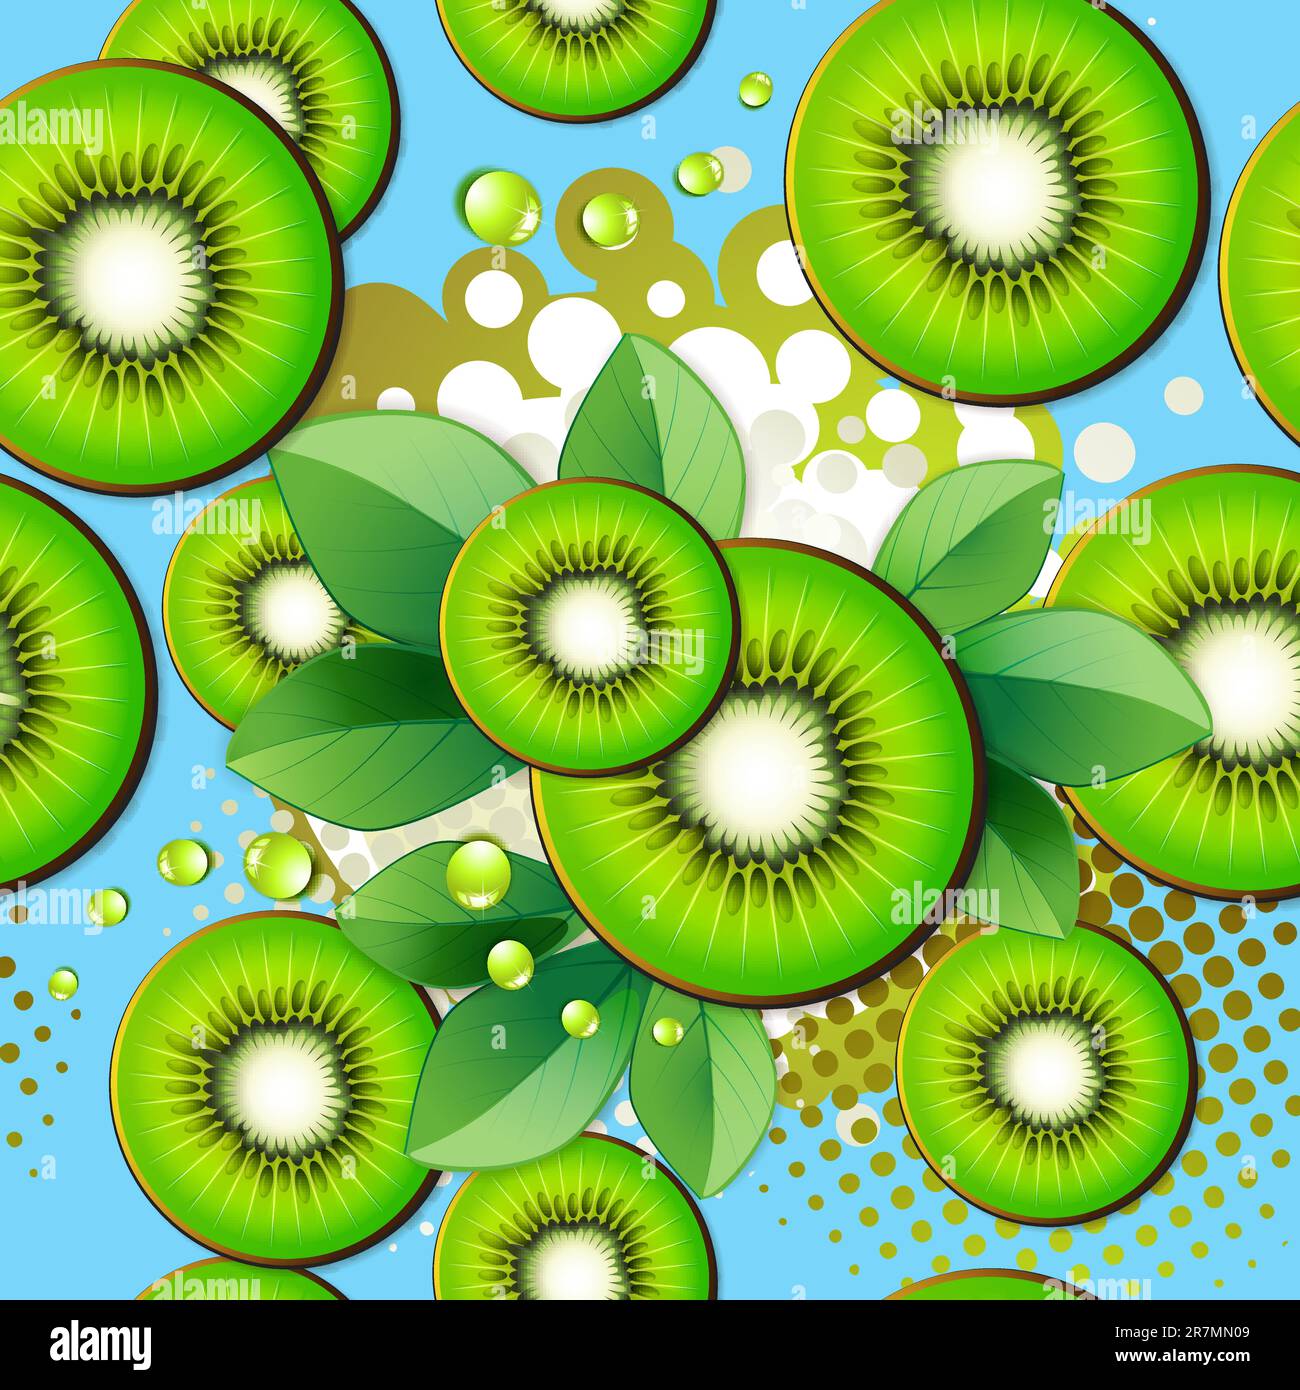 Seamless pattern with kiwi slices over colored background Stock Vector